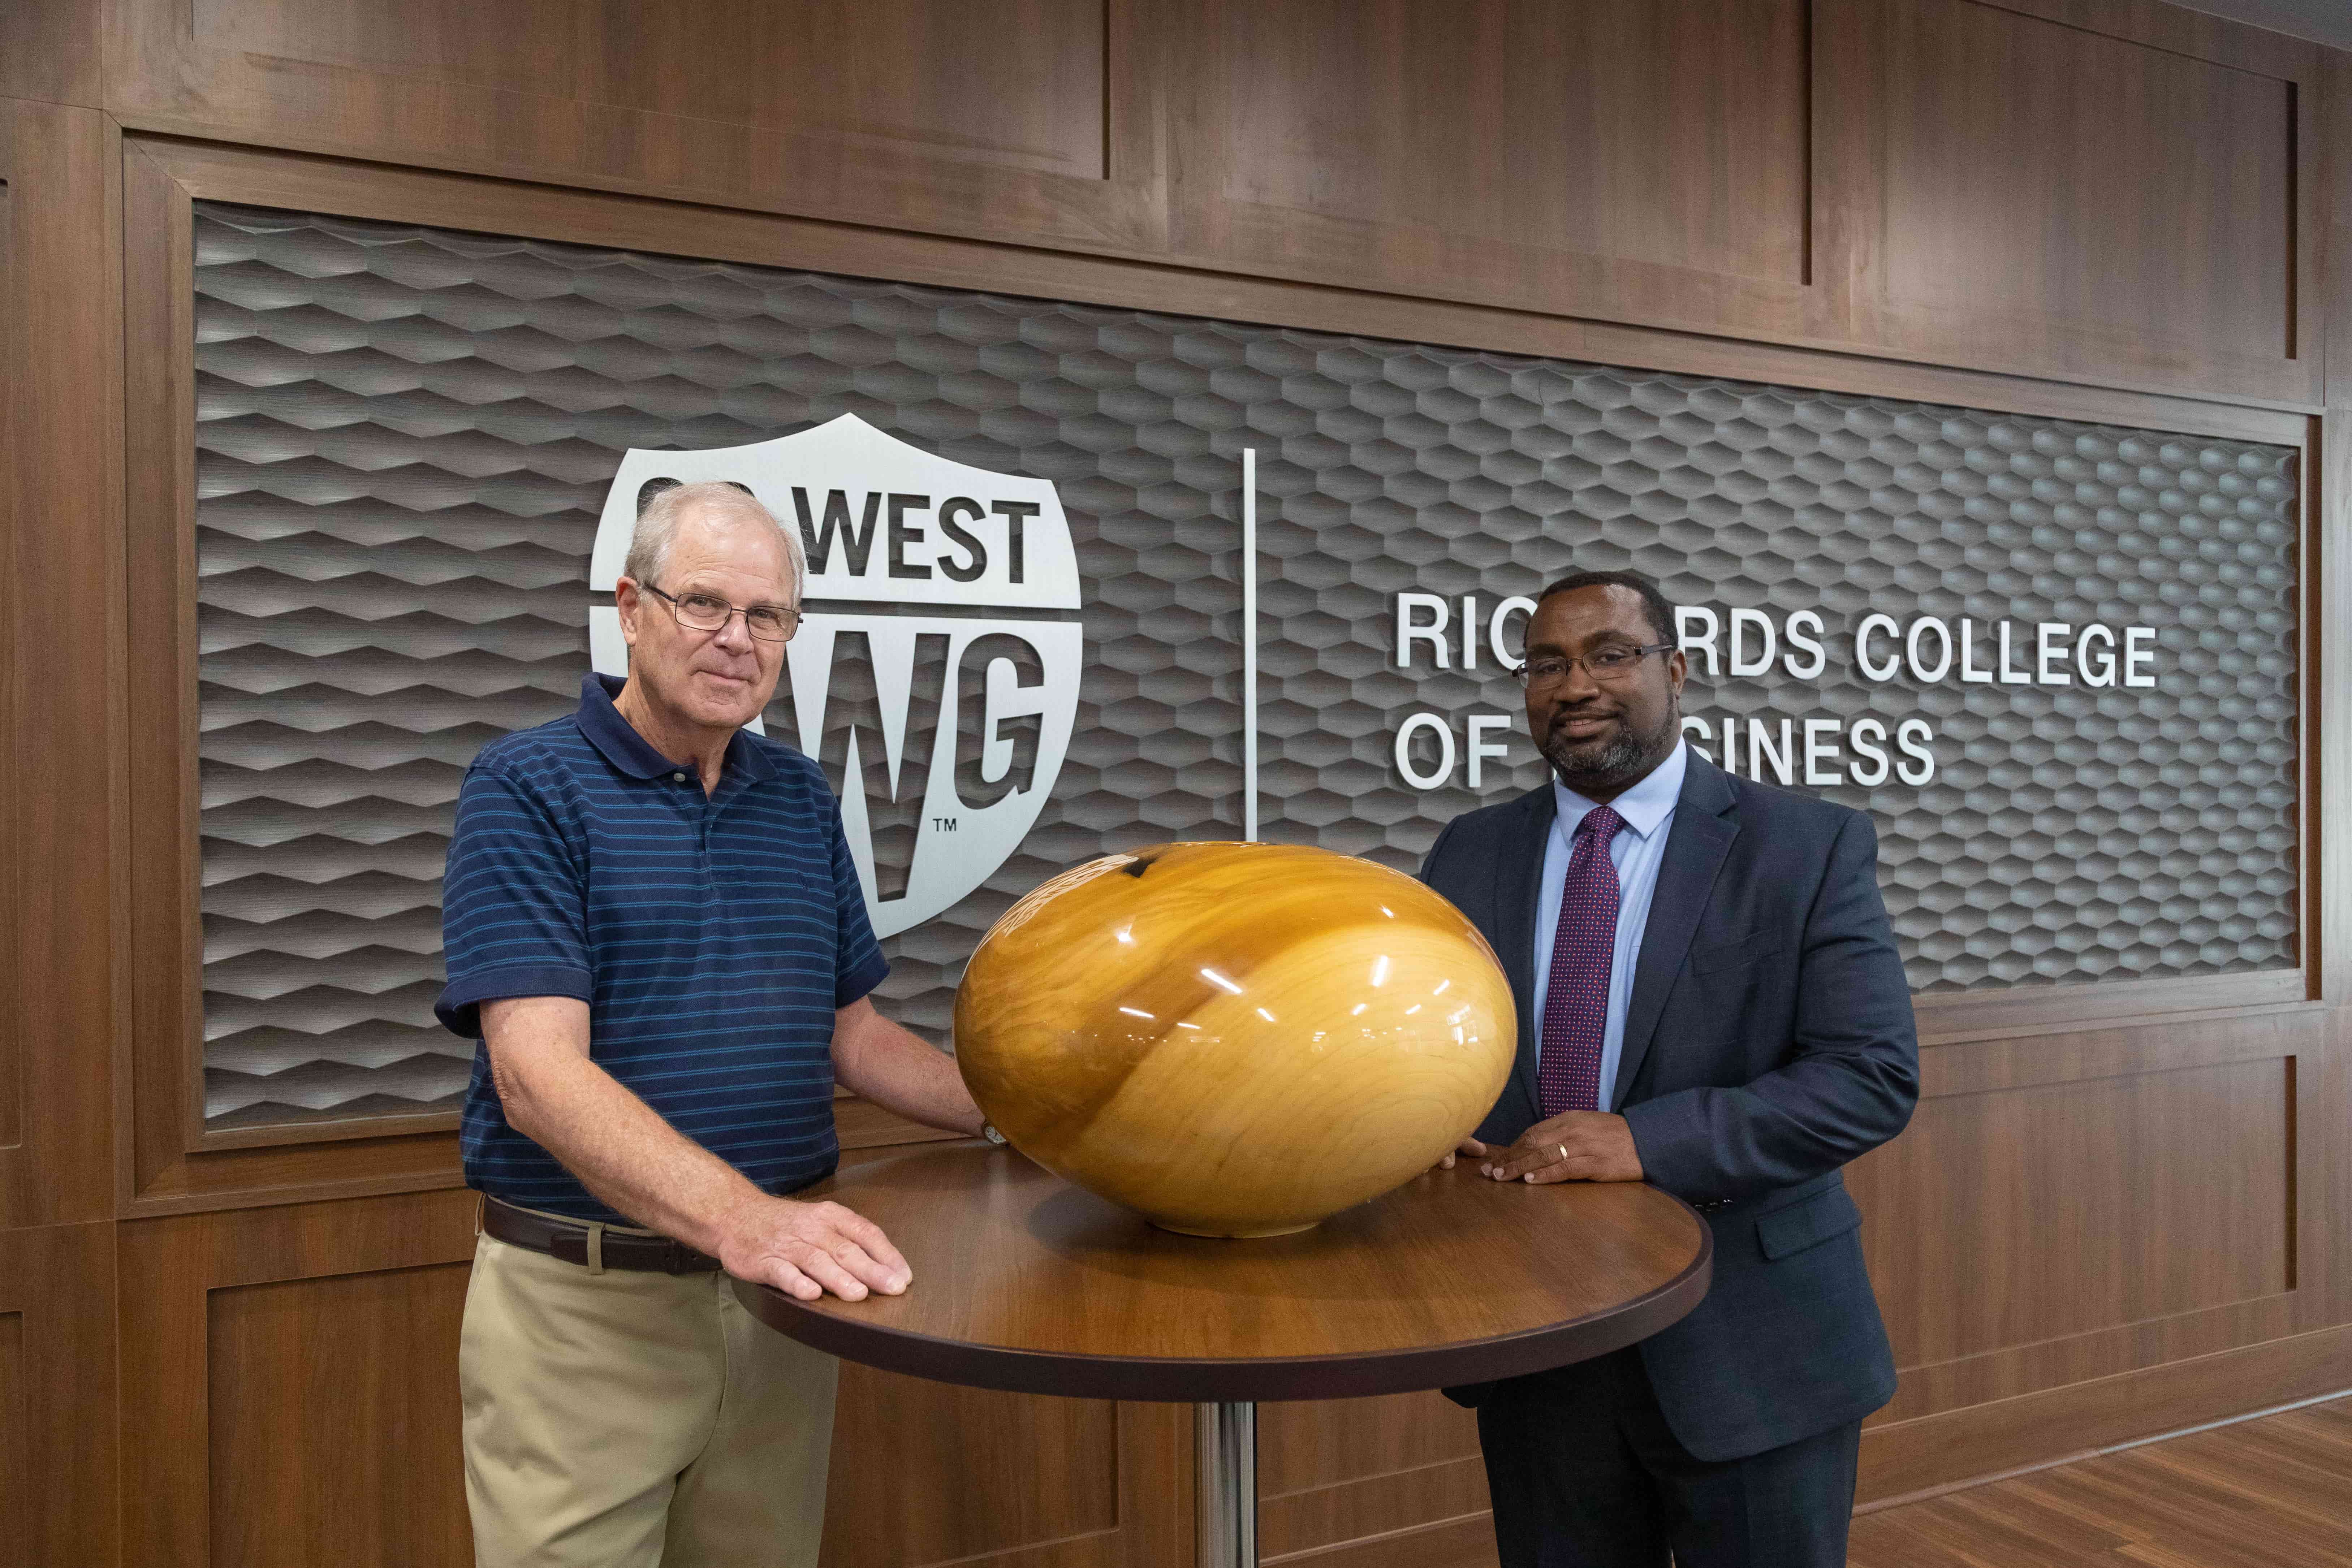 Philip Moultrop and Dr. Fortune stand for a picture next to the finished wood bowl masterfully crafted by Philip.